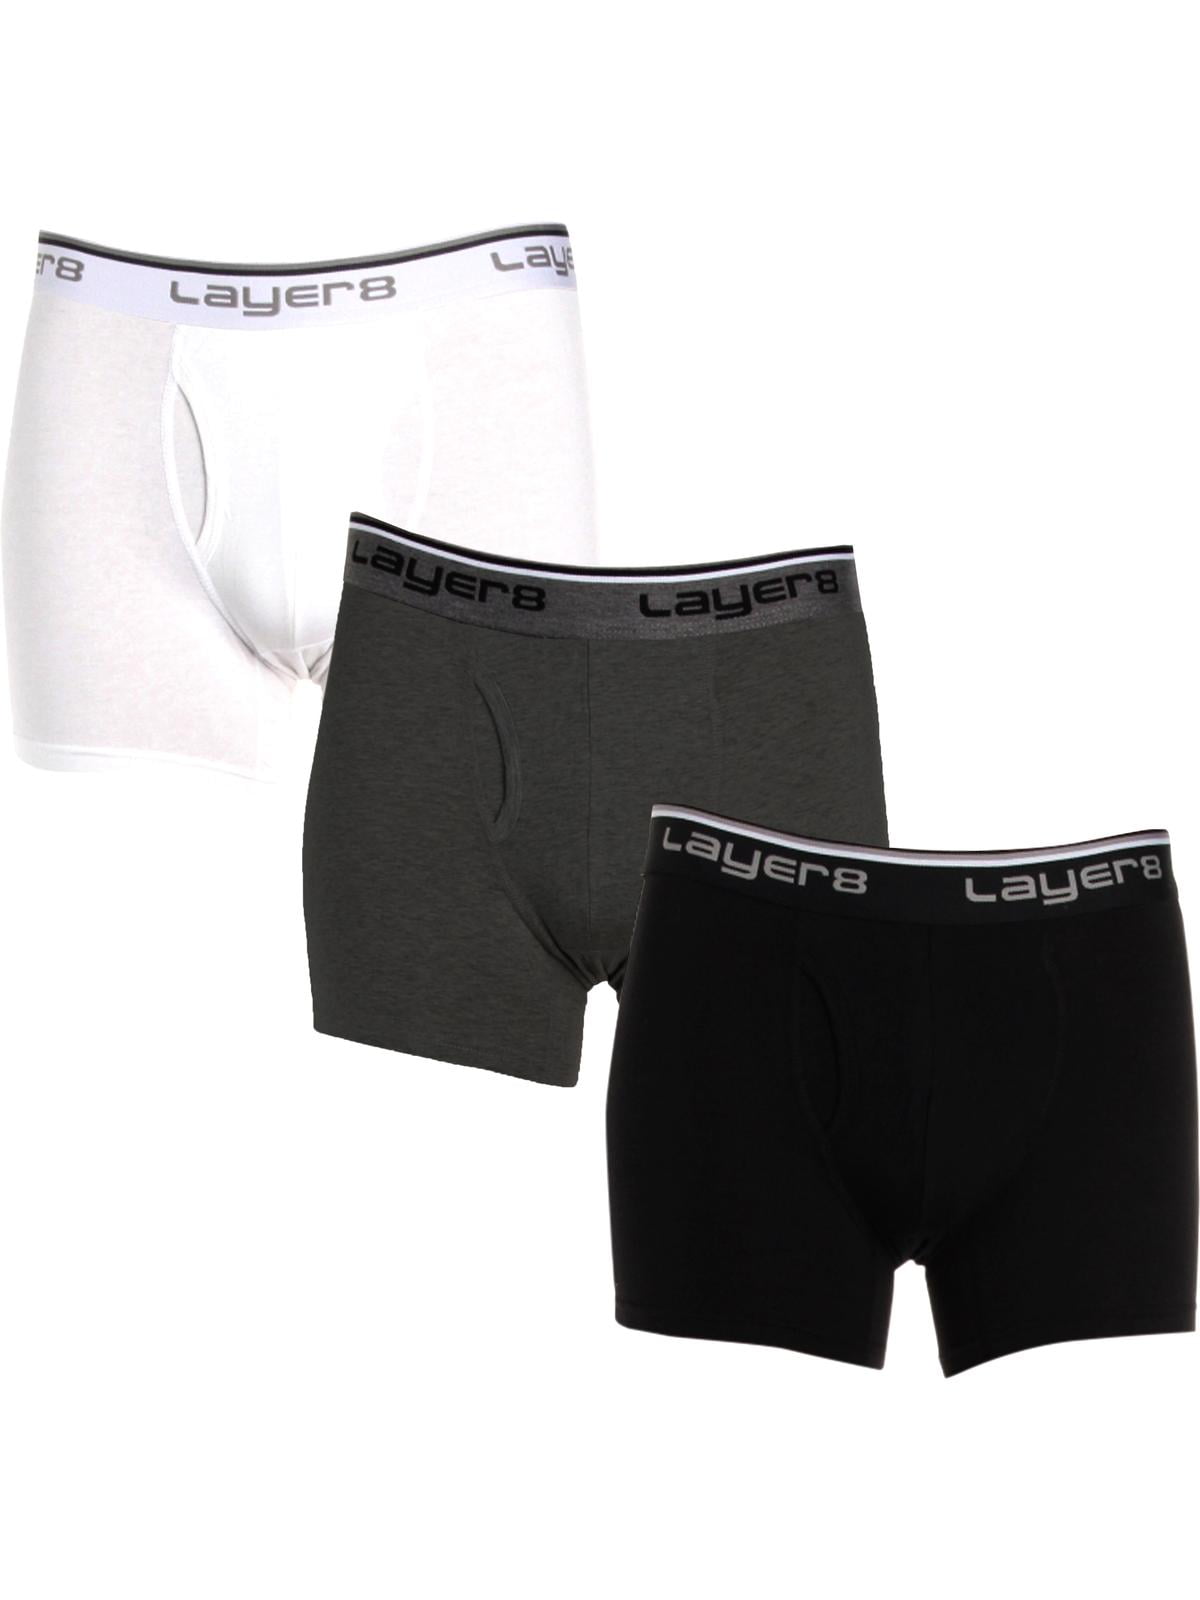 Layer 8 - Layer 8 Mens 3 Pack Everyday Boxer Brief - Walmart.com ...